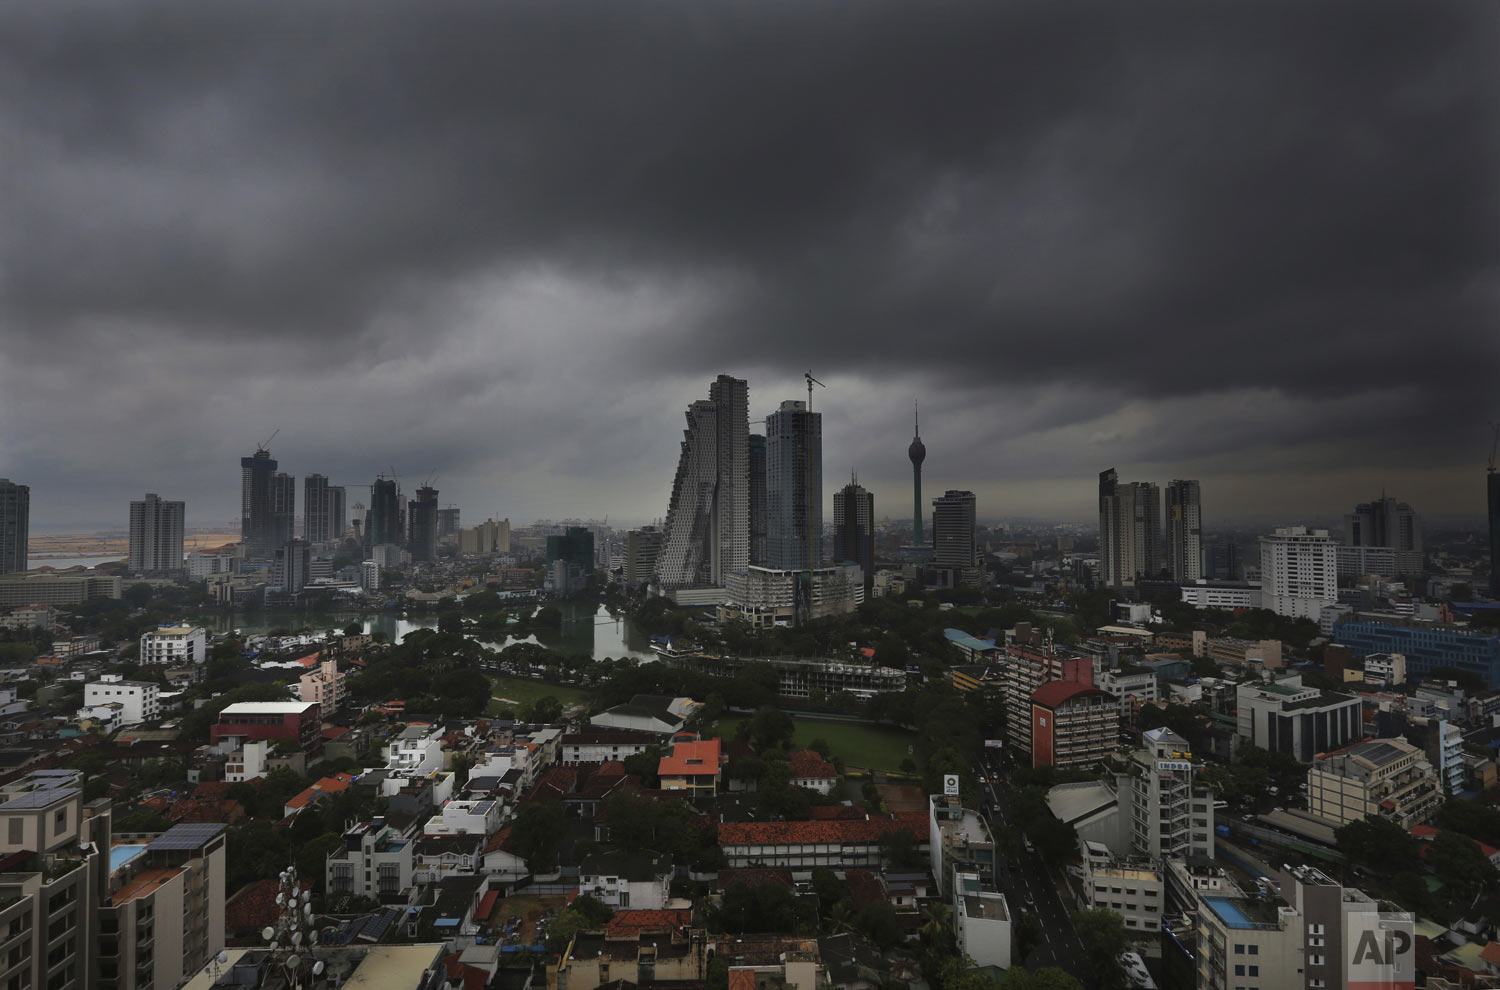  Dark clouds from a thunderstorm pass over Colombo, Sri Lanka, Tuesday, April 30, 2019. On Friday, the India Meteorological Department said the "extremely severe" cyclone Fani in the Bay of Bengal hit the coastal state of Odisha around 8 a.m., with w